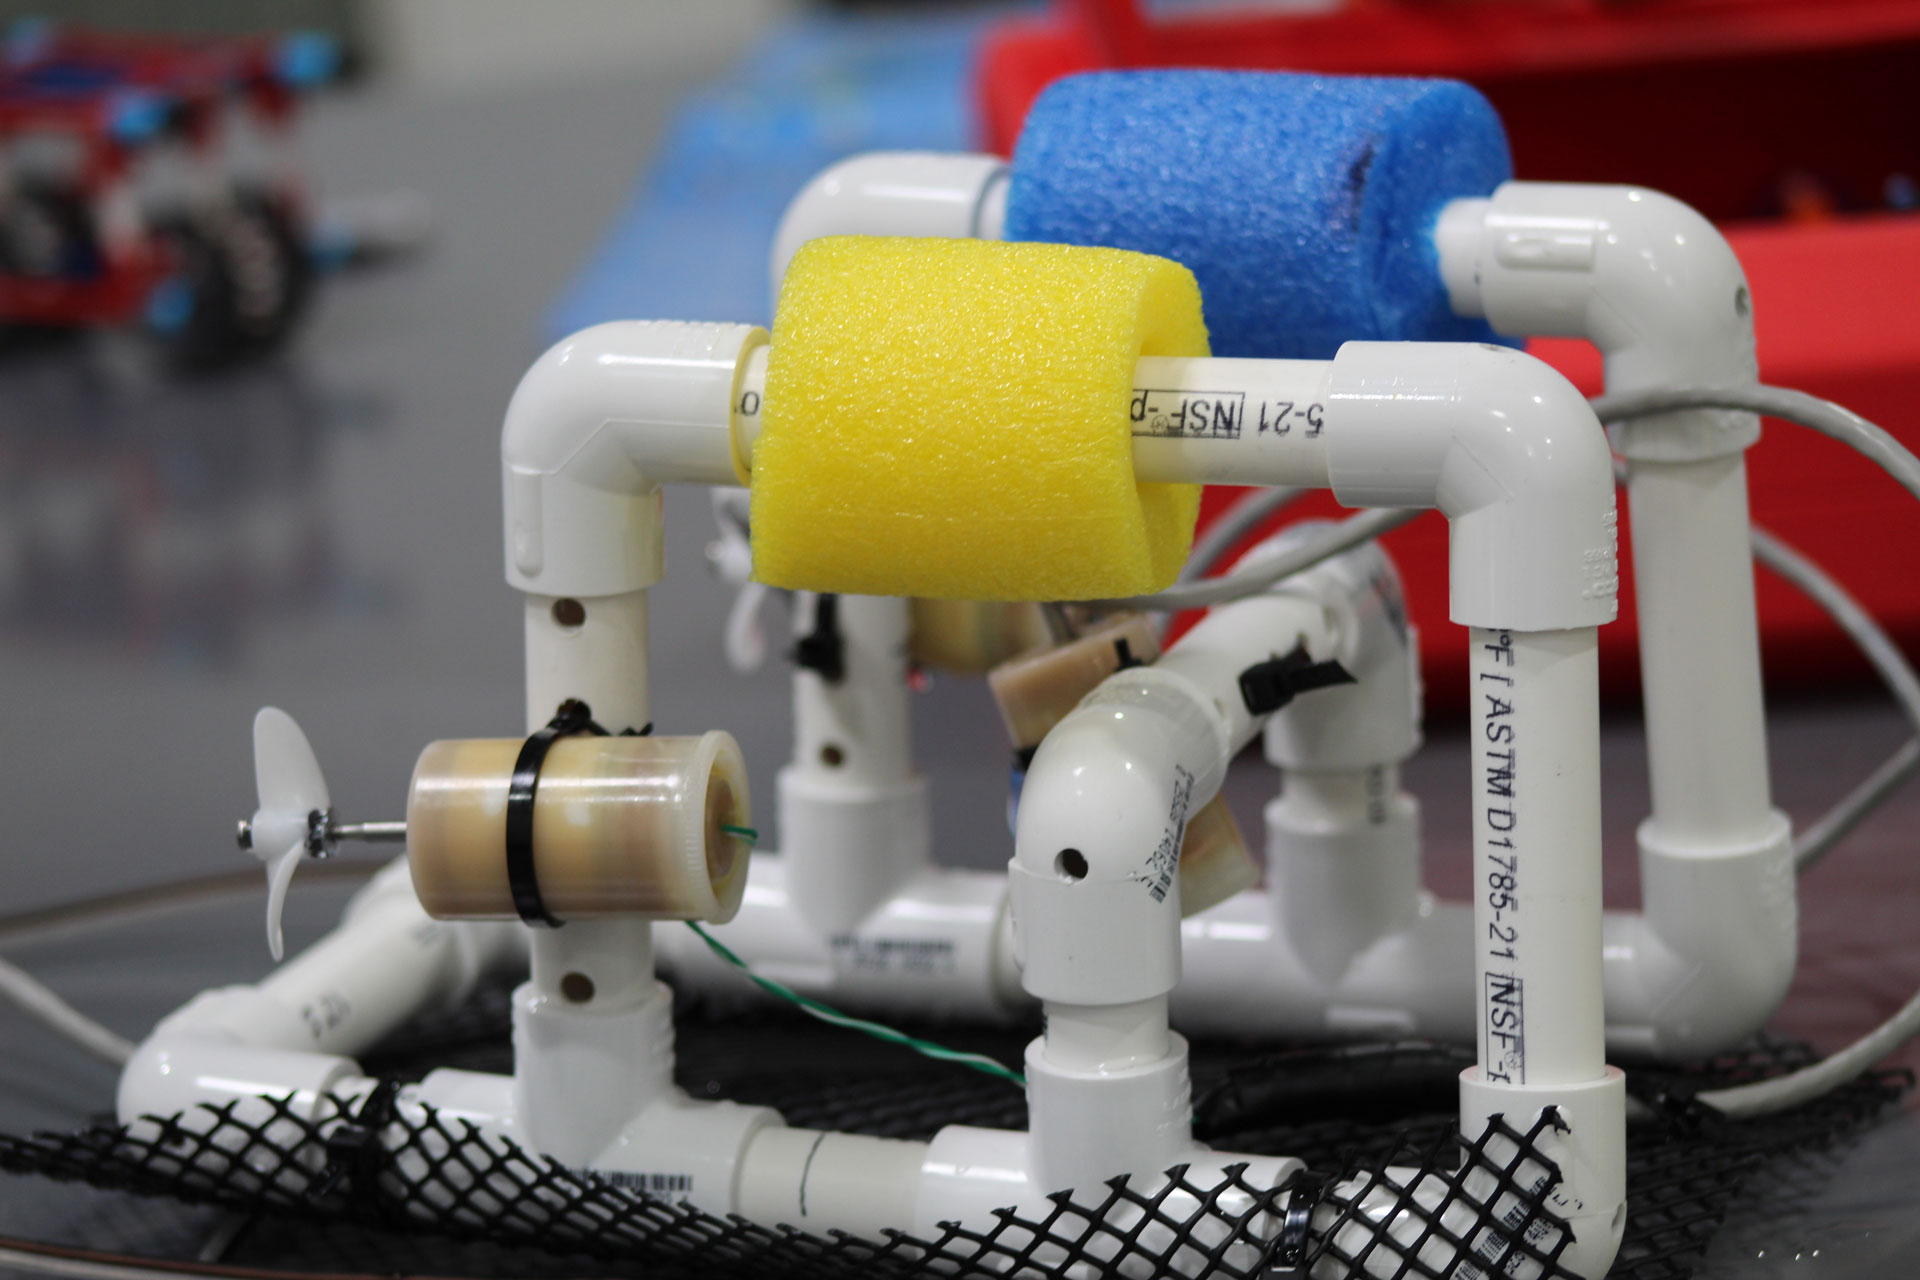 A remotely operated vehicle built with foam rolls, PVC pipes and long cables